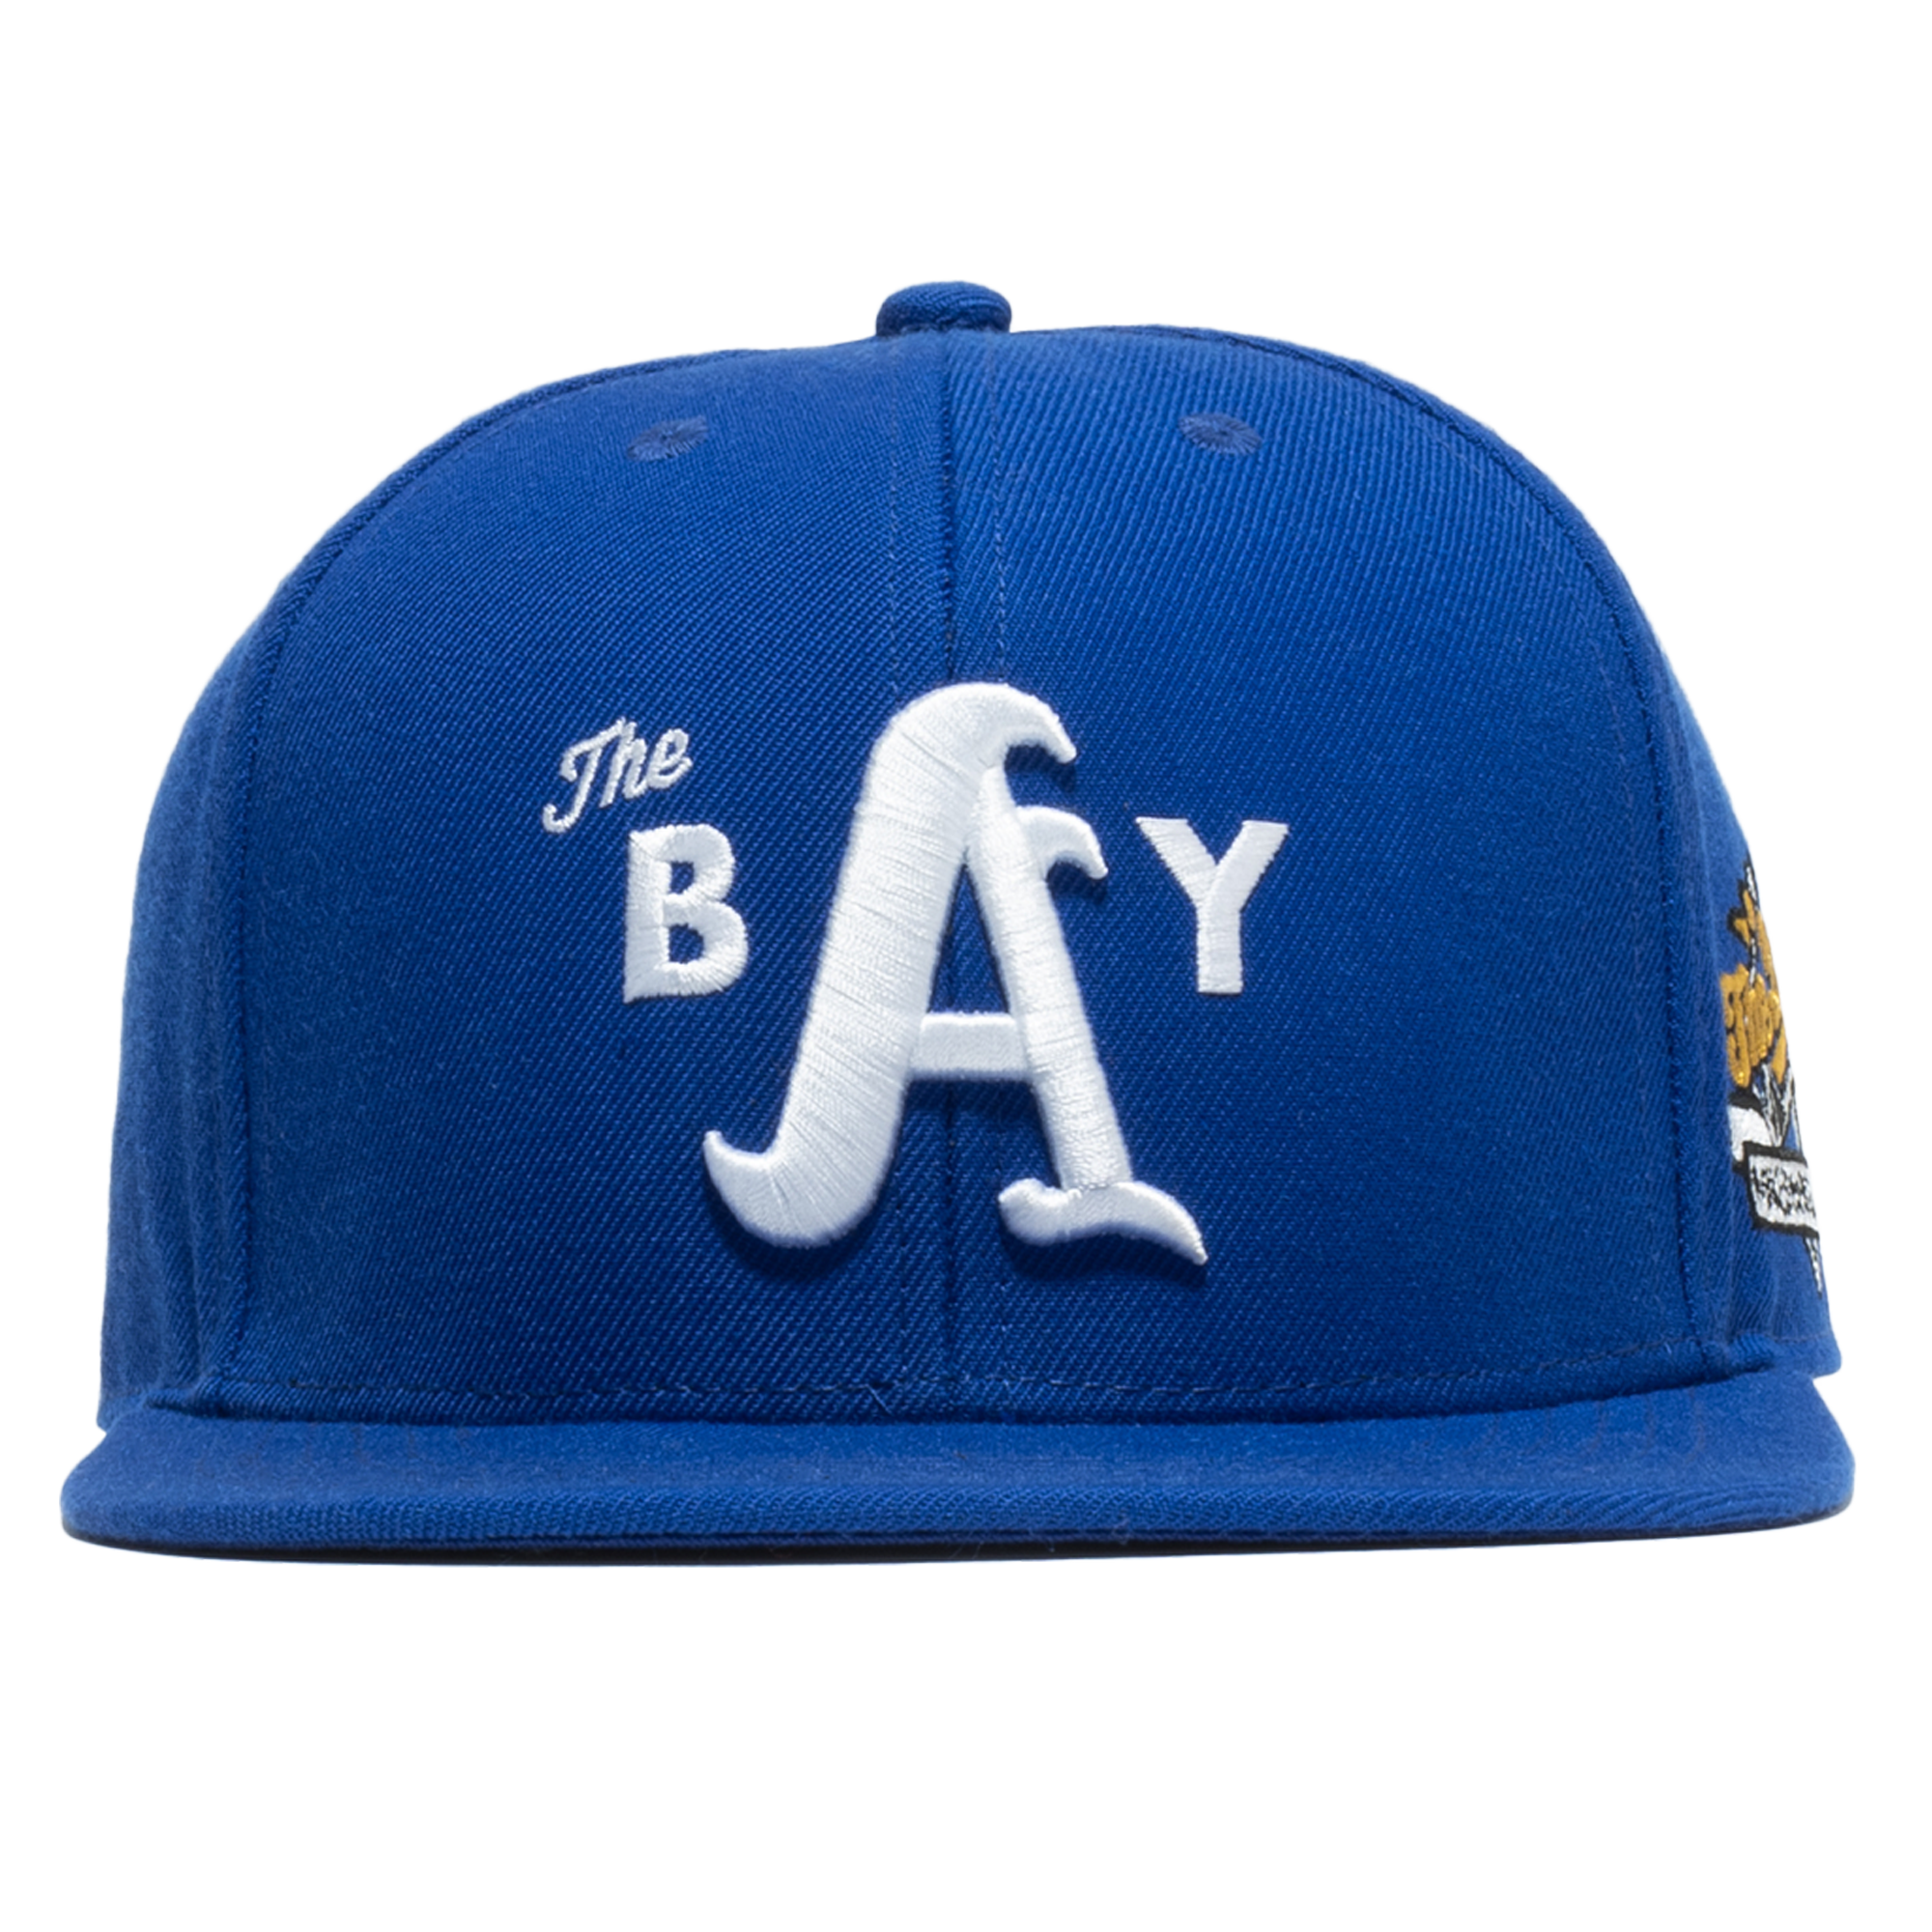 Front view of a Royal blue hat with 3D white embroidered The Bay logo on the crown and blue square flat bill. 